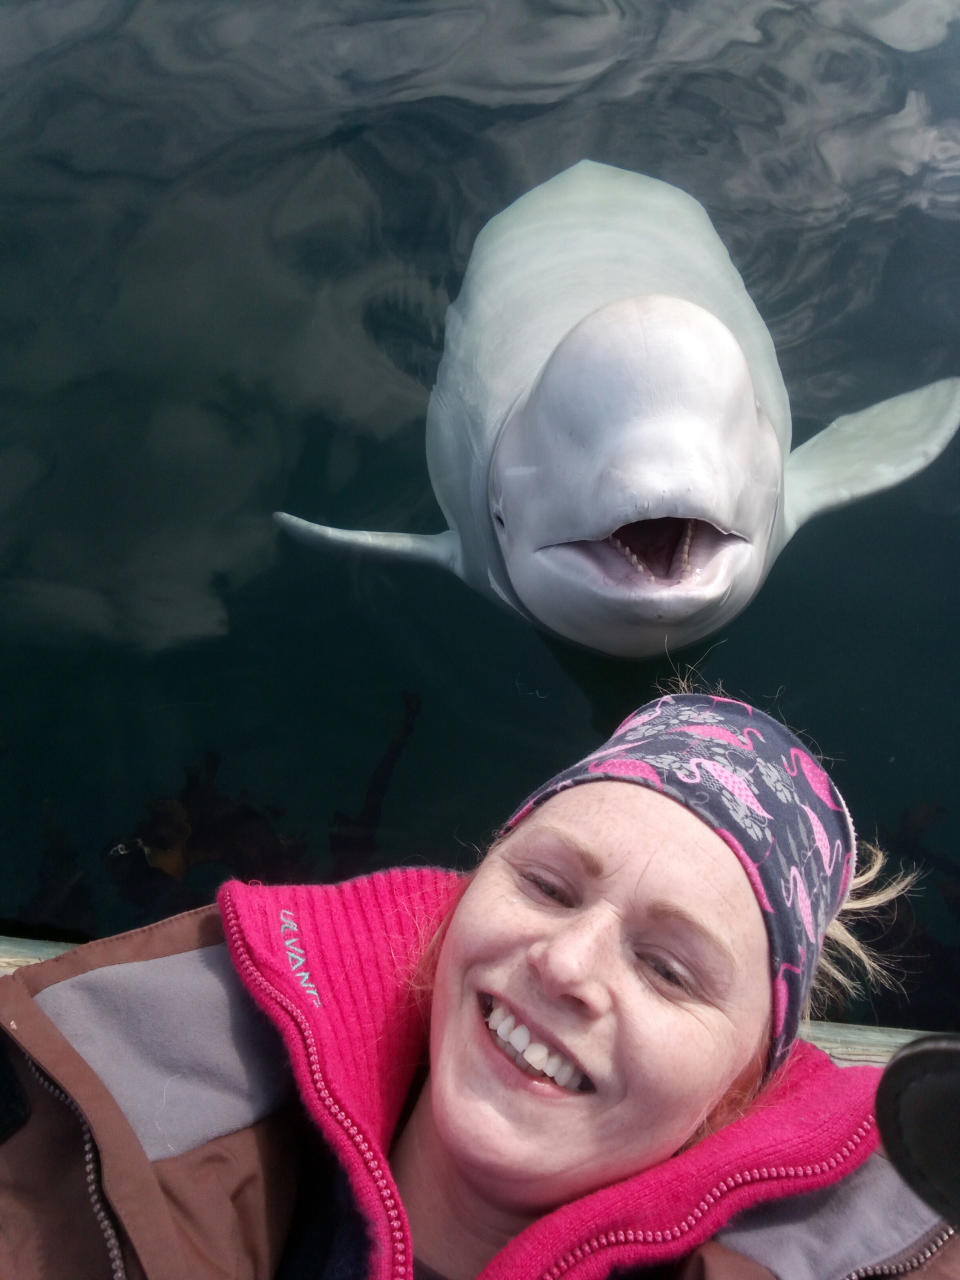 Linn Saether poses with Hvaldimir days after a fisherman removed a harness with a camera mount from the beluga whale, in Tufjord, Norway. (Photo: Linn Saether via AP)